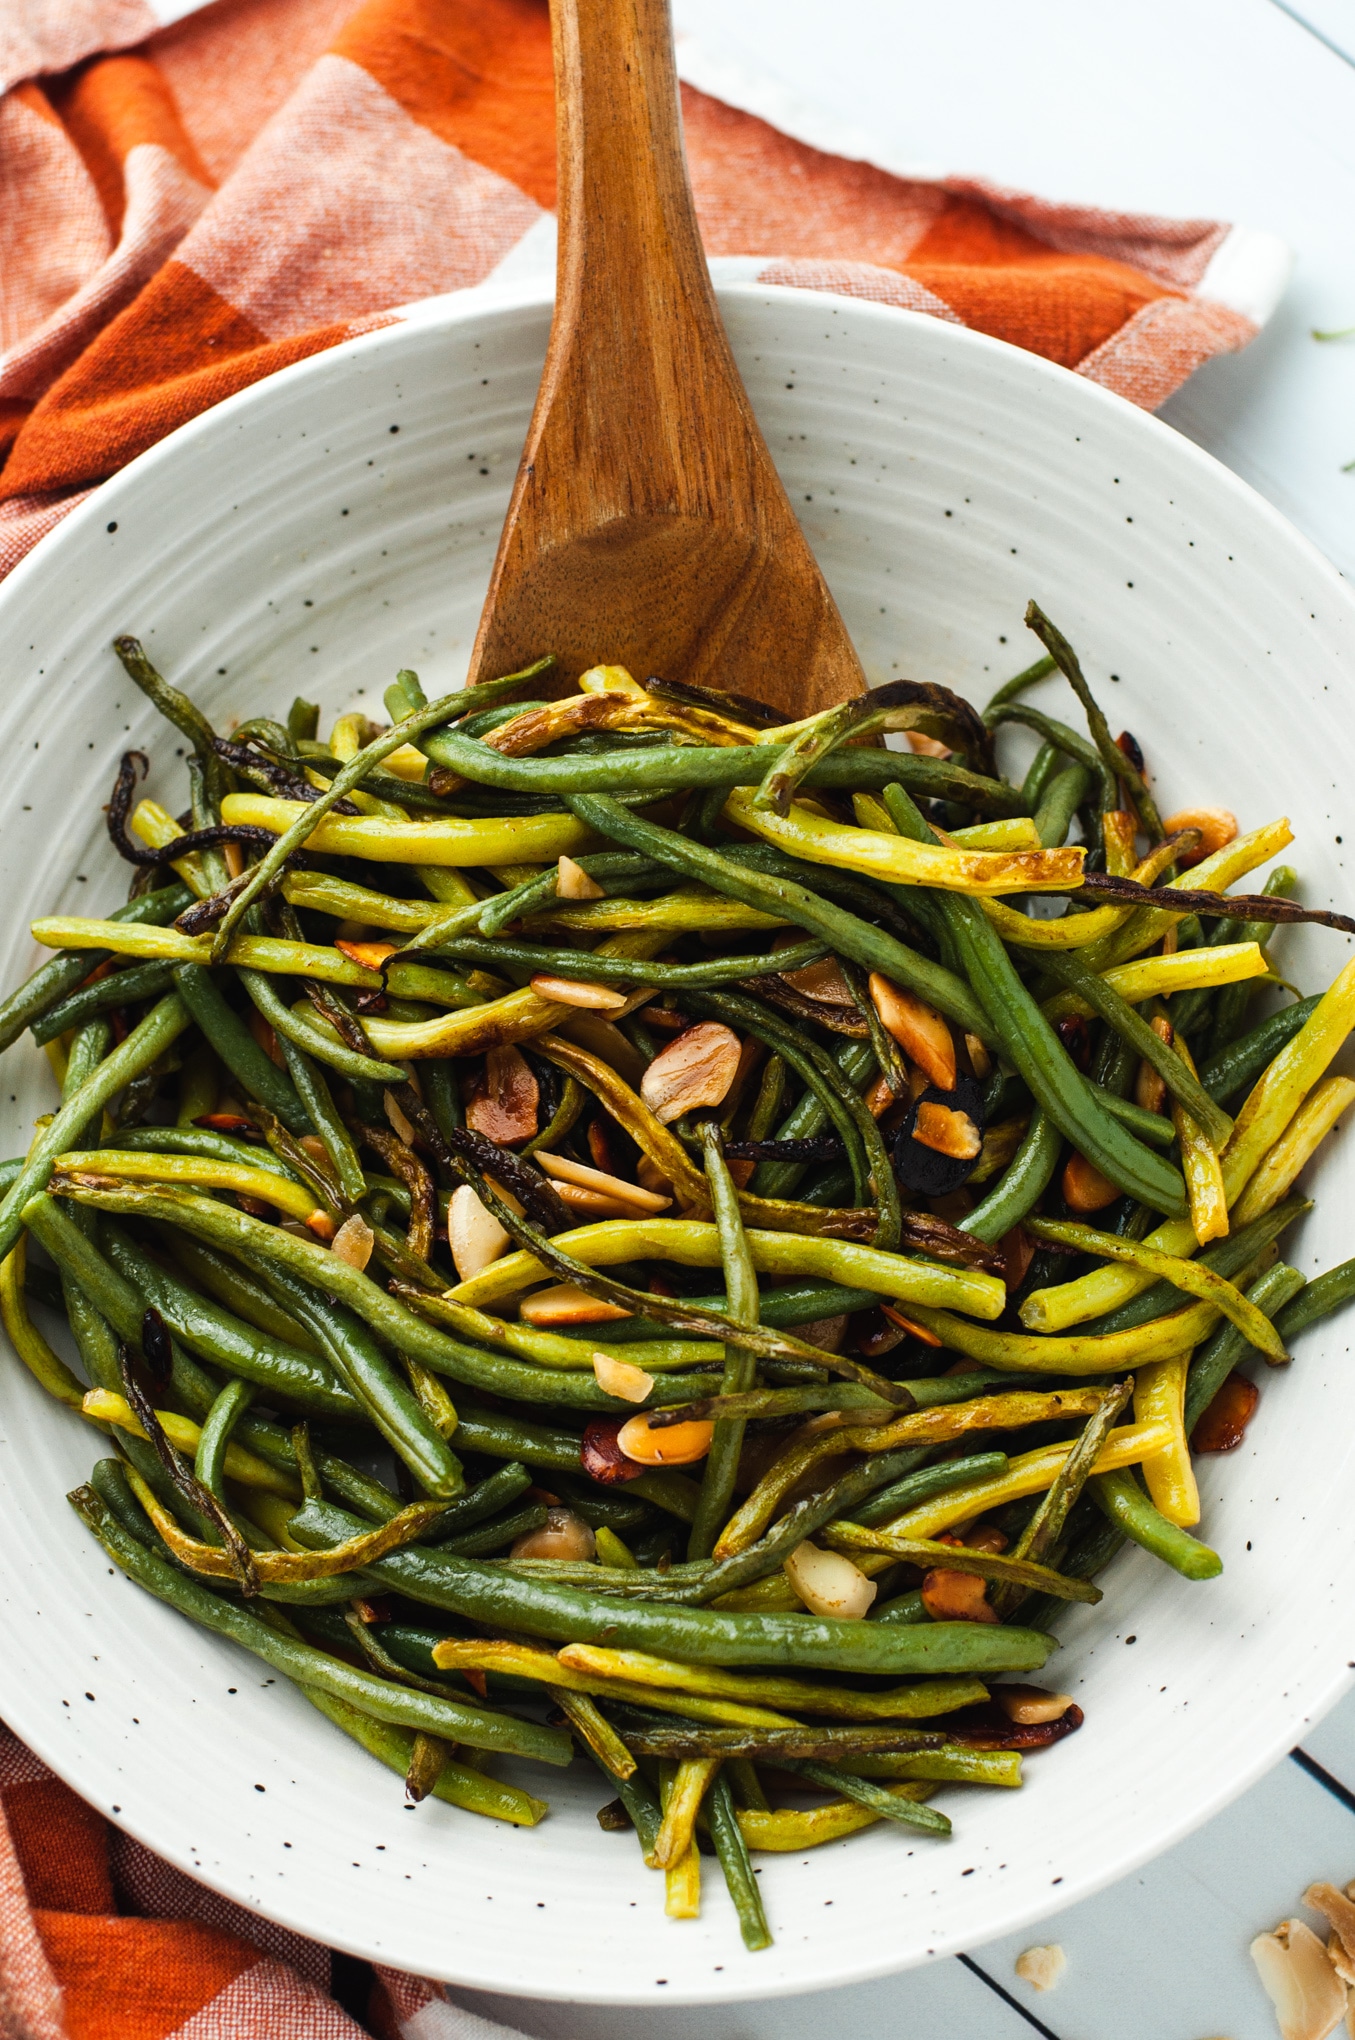 One recipe of green beans almondine in a white ceramic bowl with a wooden serving spoon.